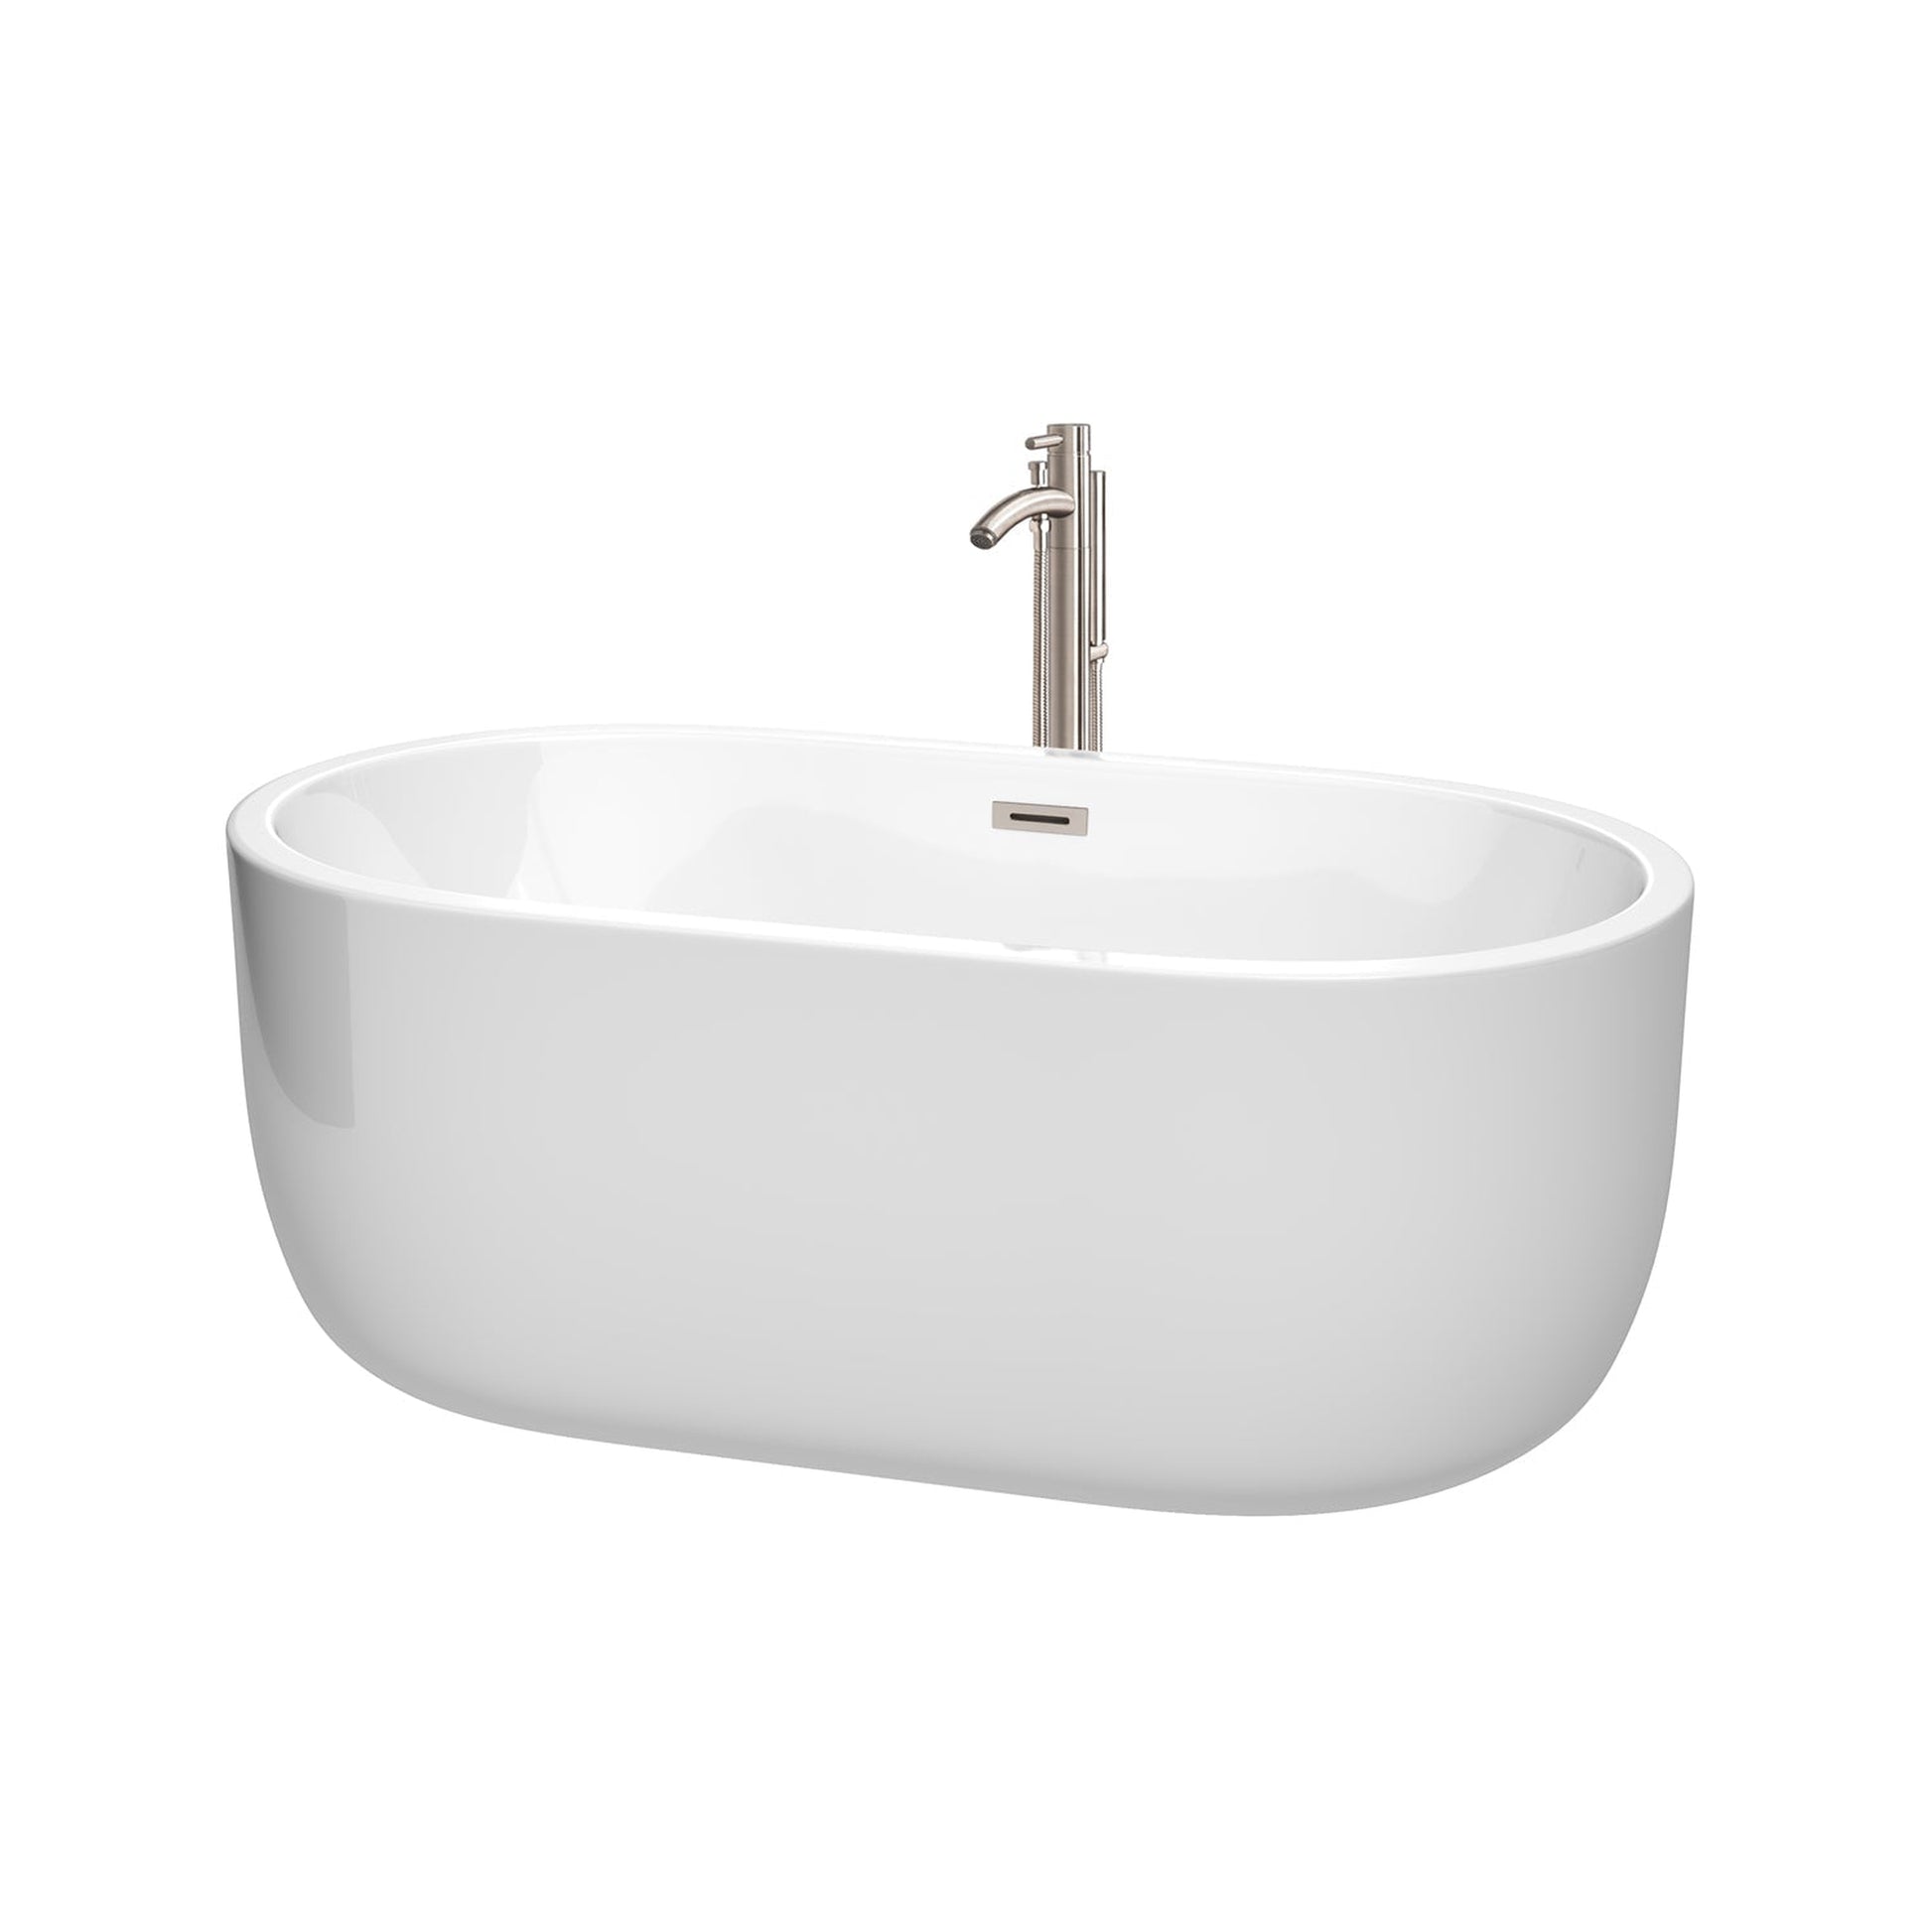 Wyndham Collection Juliette 60" Freestanding Bathtub in White With Floor Mounted Faucet, Drain and Overflow Trim in Brushed Nickel